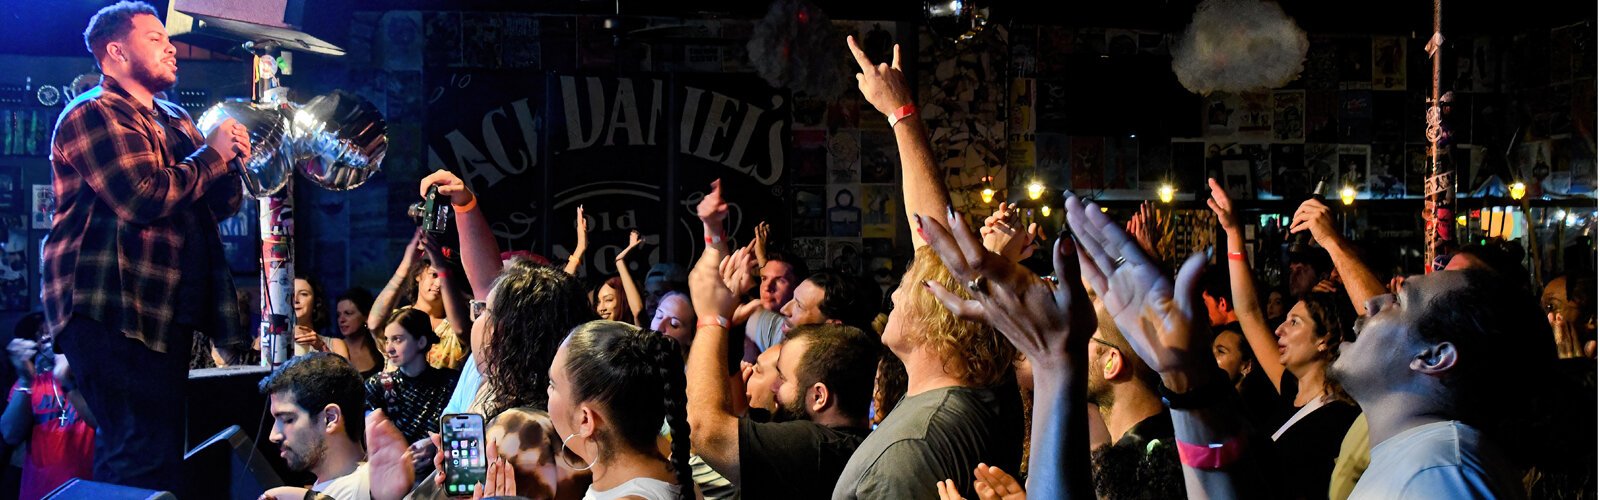  The audience applauds rapper Perception during Vibes of the Bay, held at a packed Crowbar in Tampa’s Ybor City on September 30th.